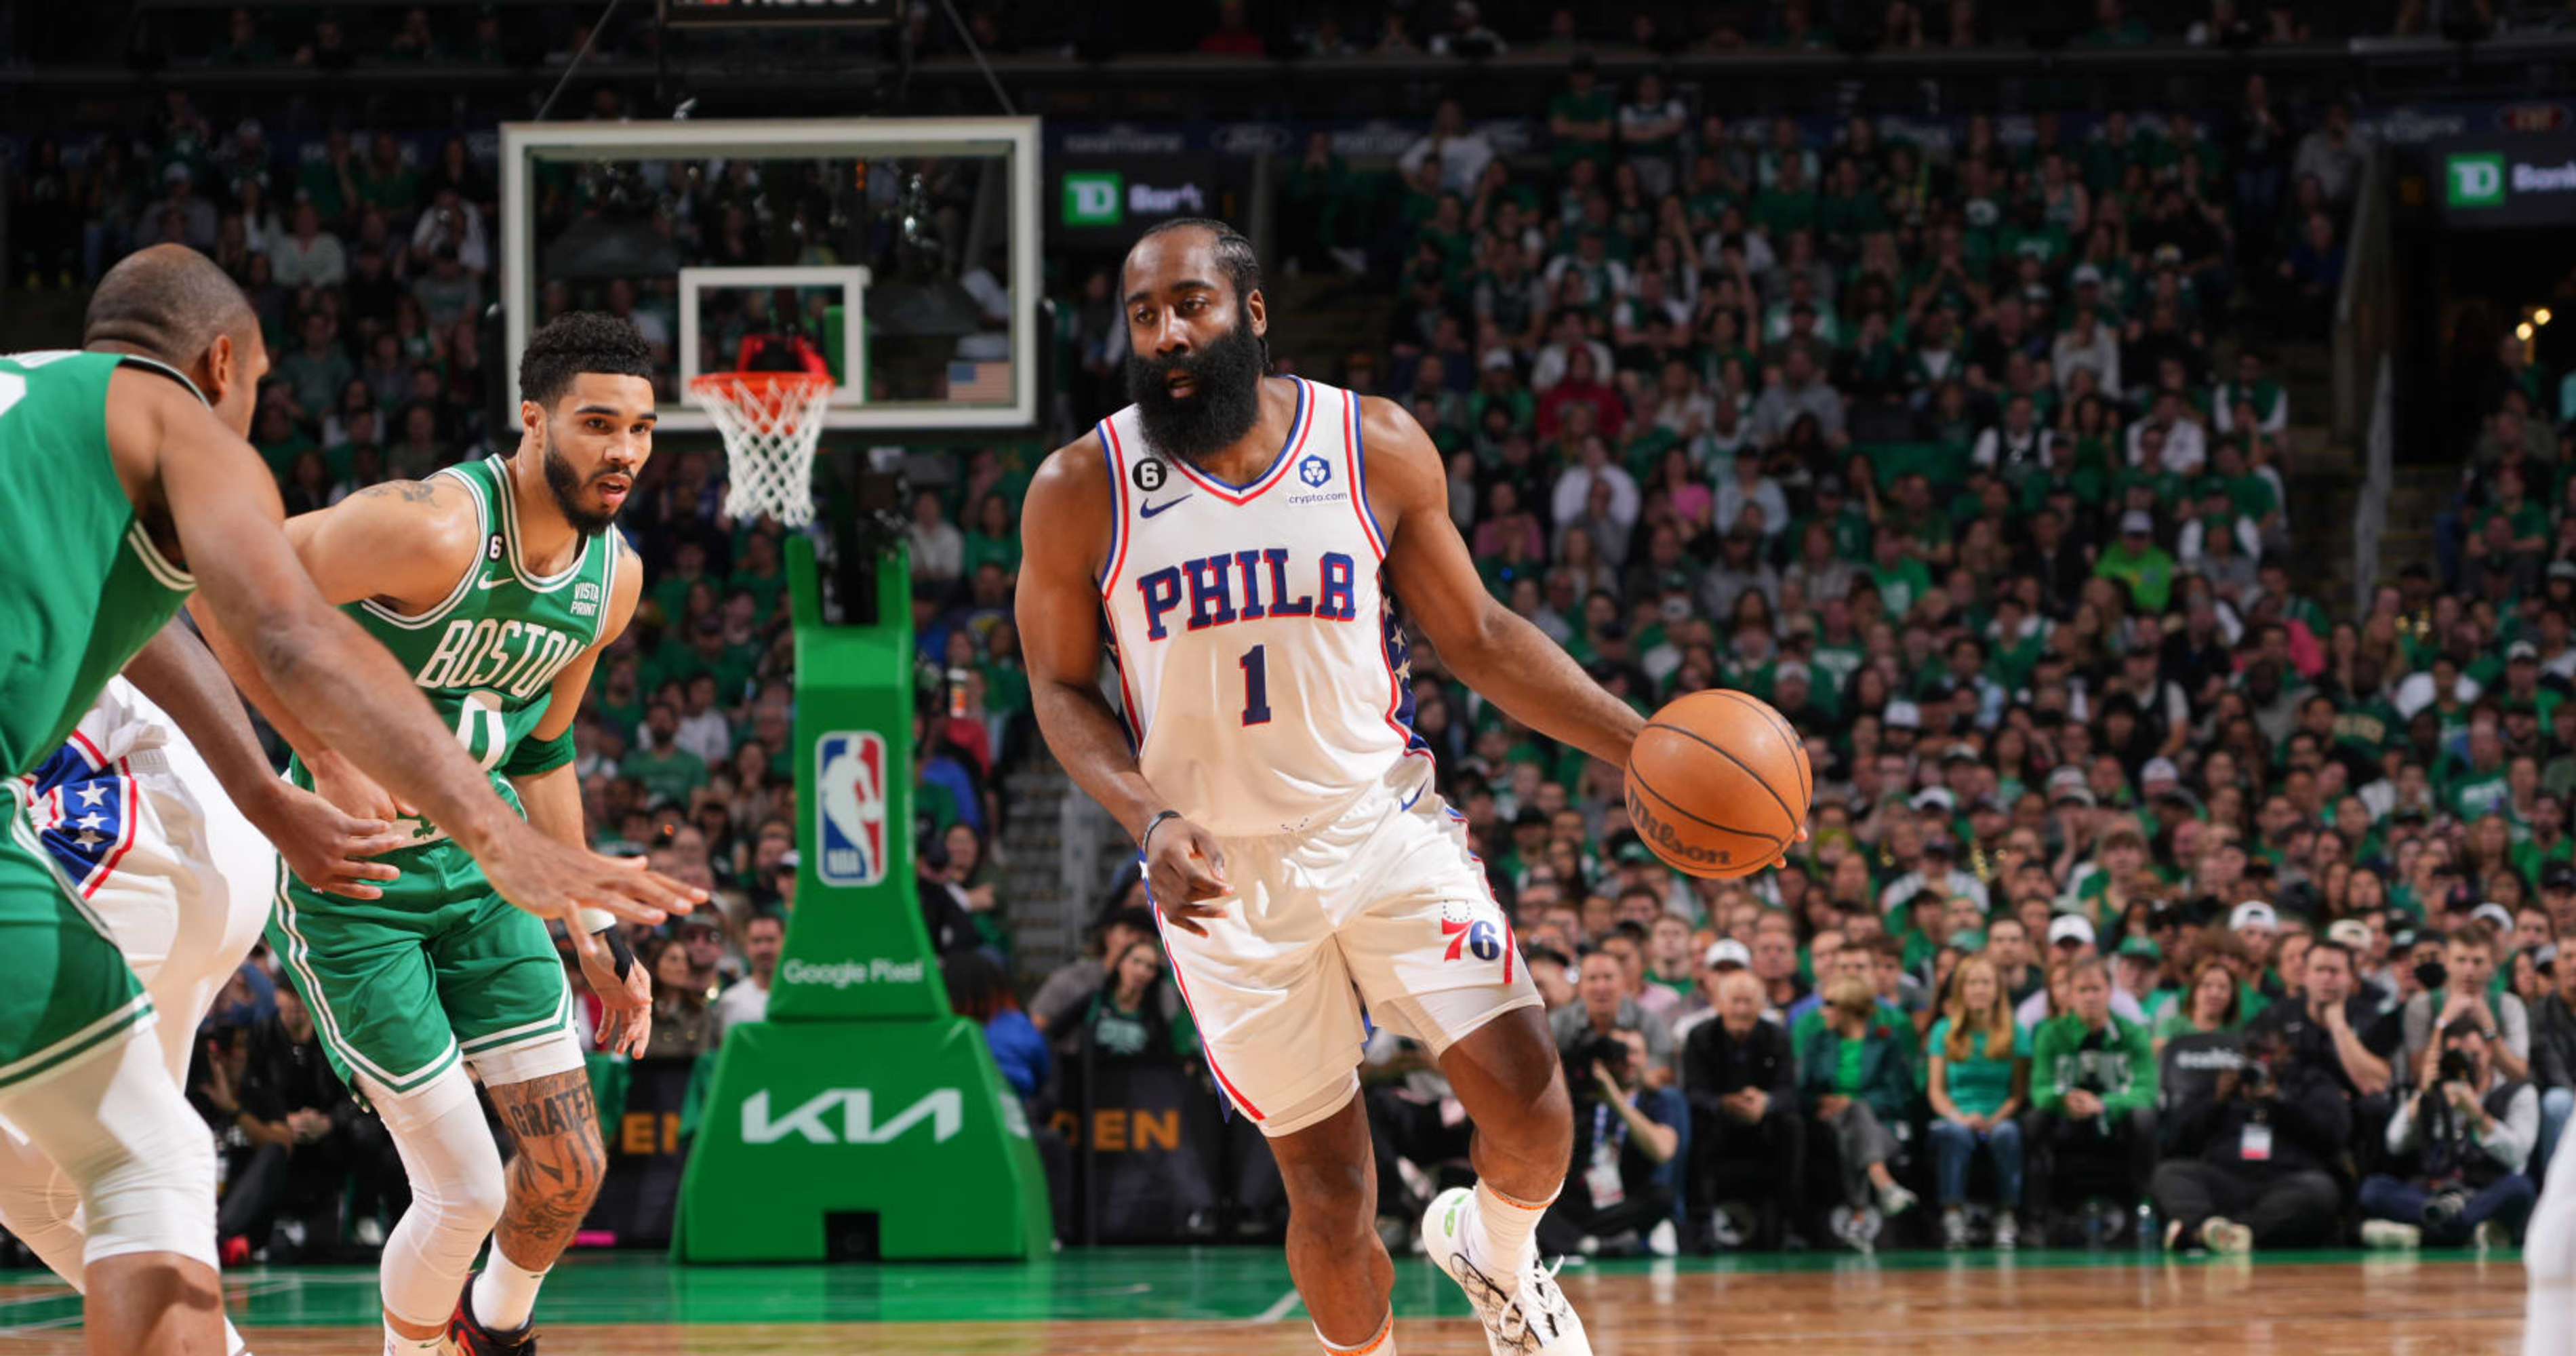 James Harden calls 76ers President Daryl Morey a liar and says he won't  play for his team, Sports